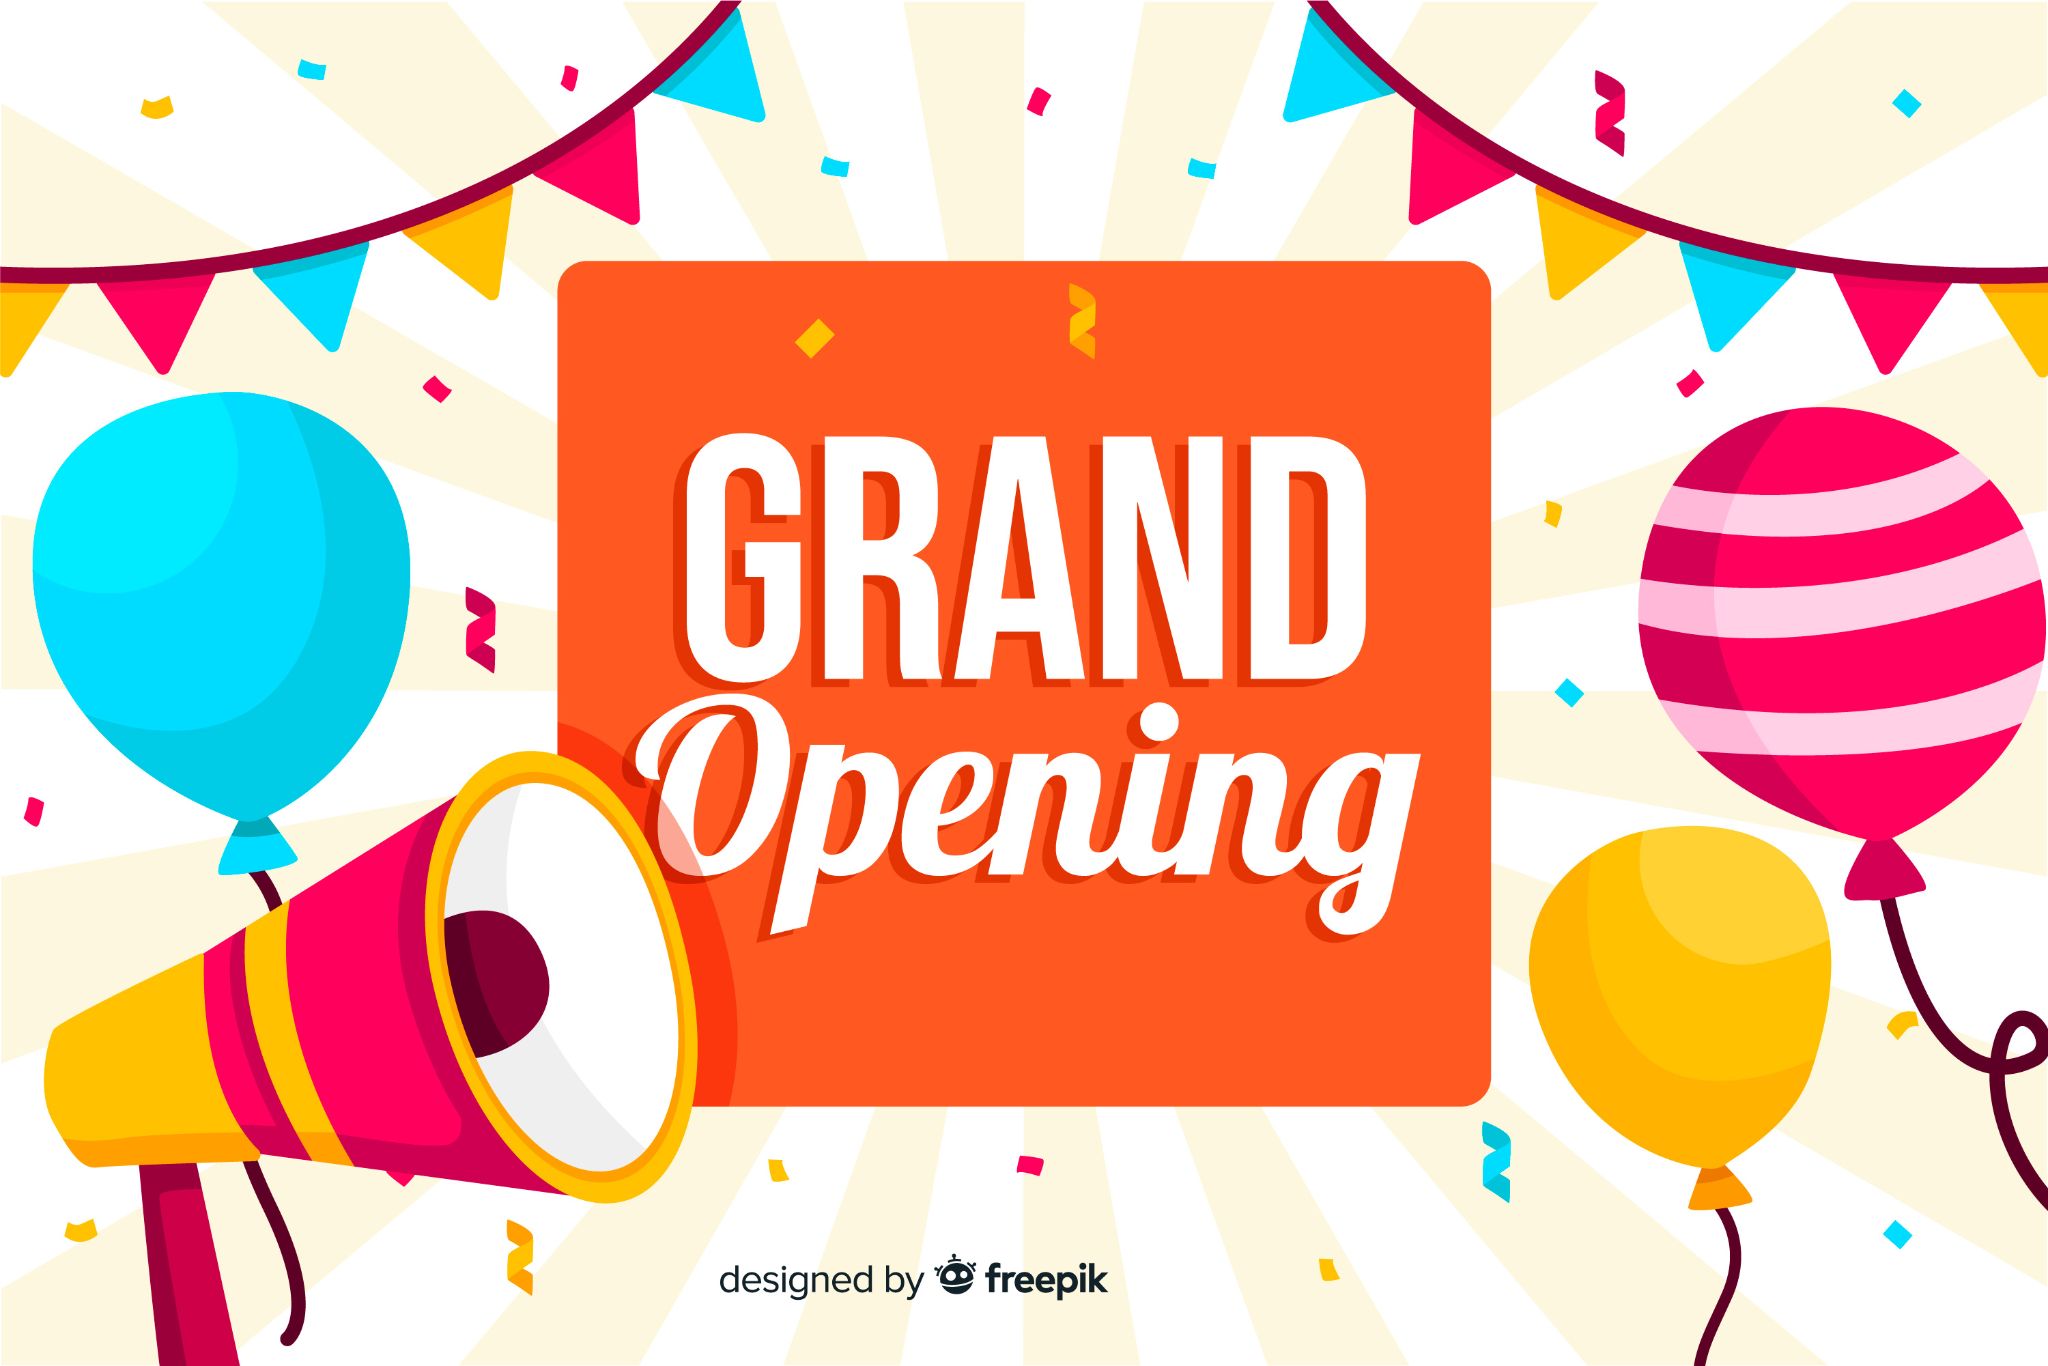 An illustration of a banner with the words "Grand Opening" (as opposed to the incorrect version found throughout Korea—Grand Open.